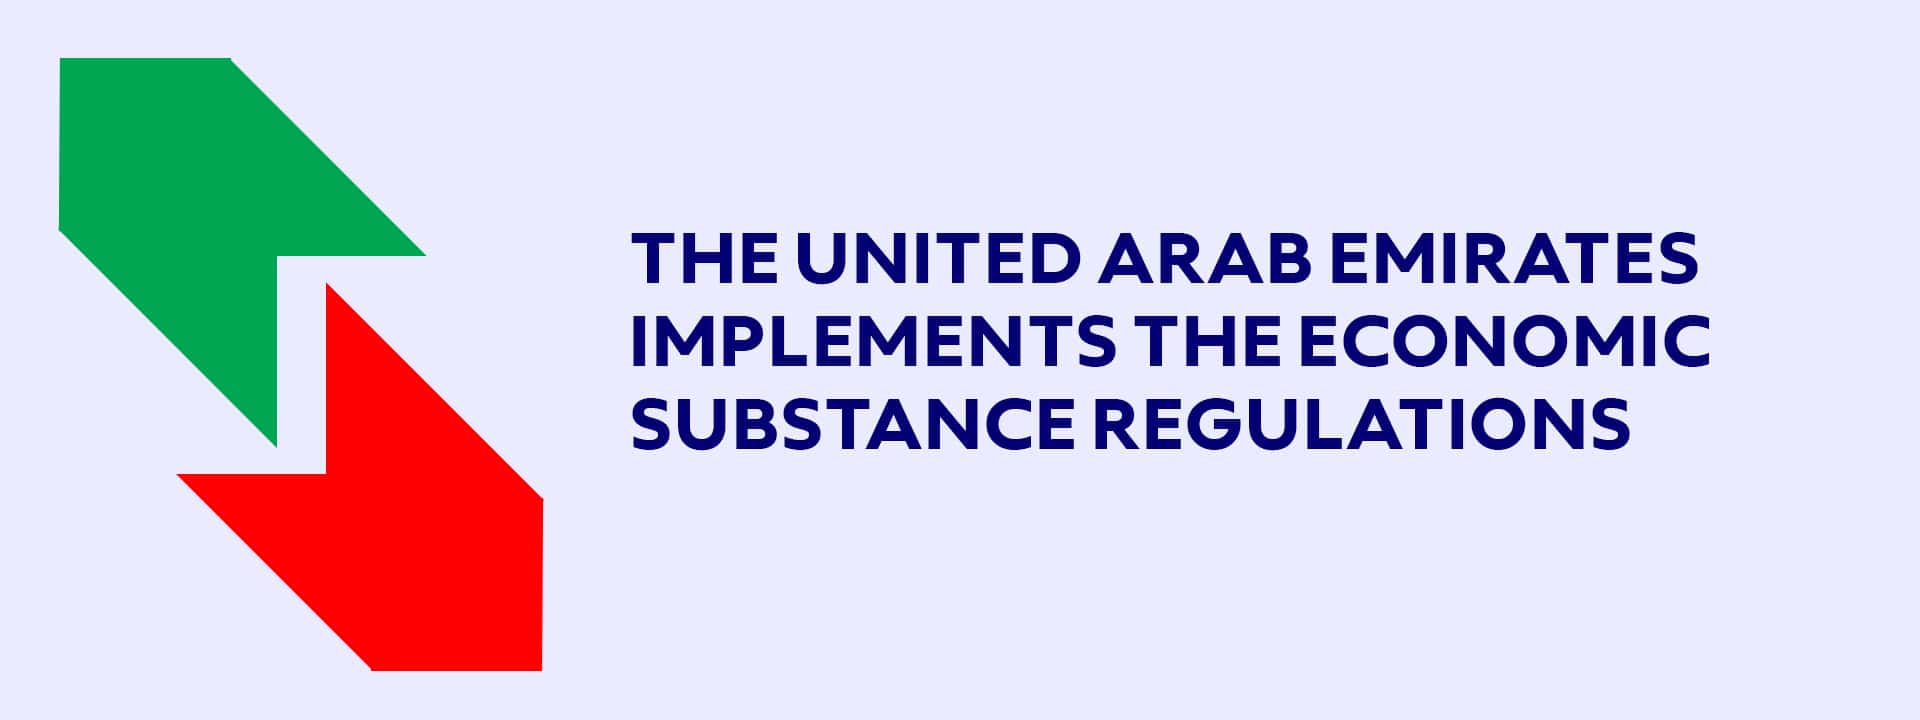 The United Arab Emirates implements the Economic Substance Regulations